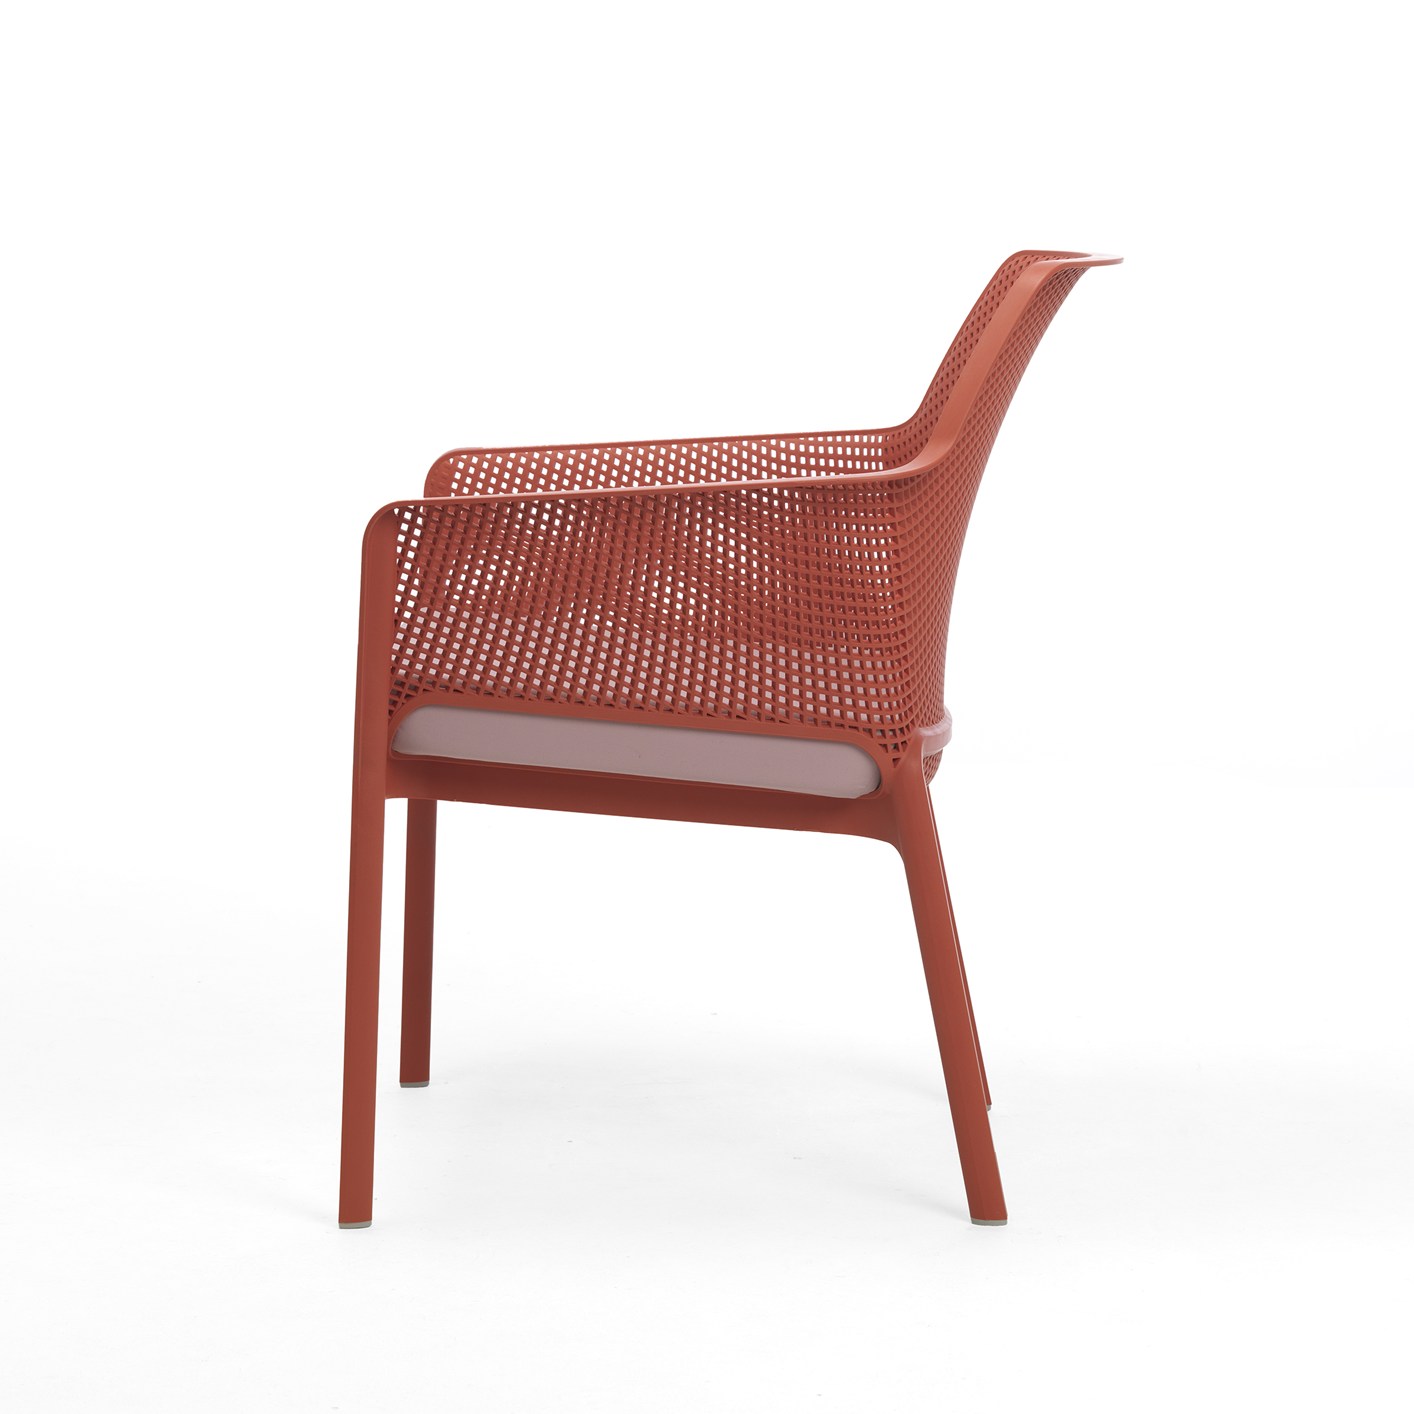 Net Relax Outdoor Chair by Raffaello Galiotto for Nardi